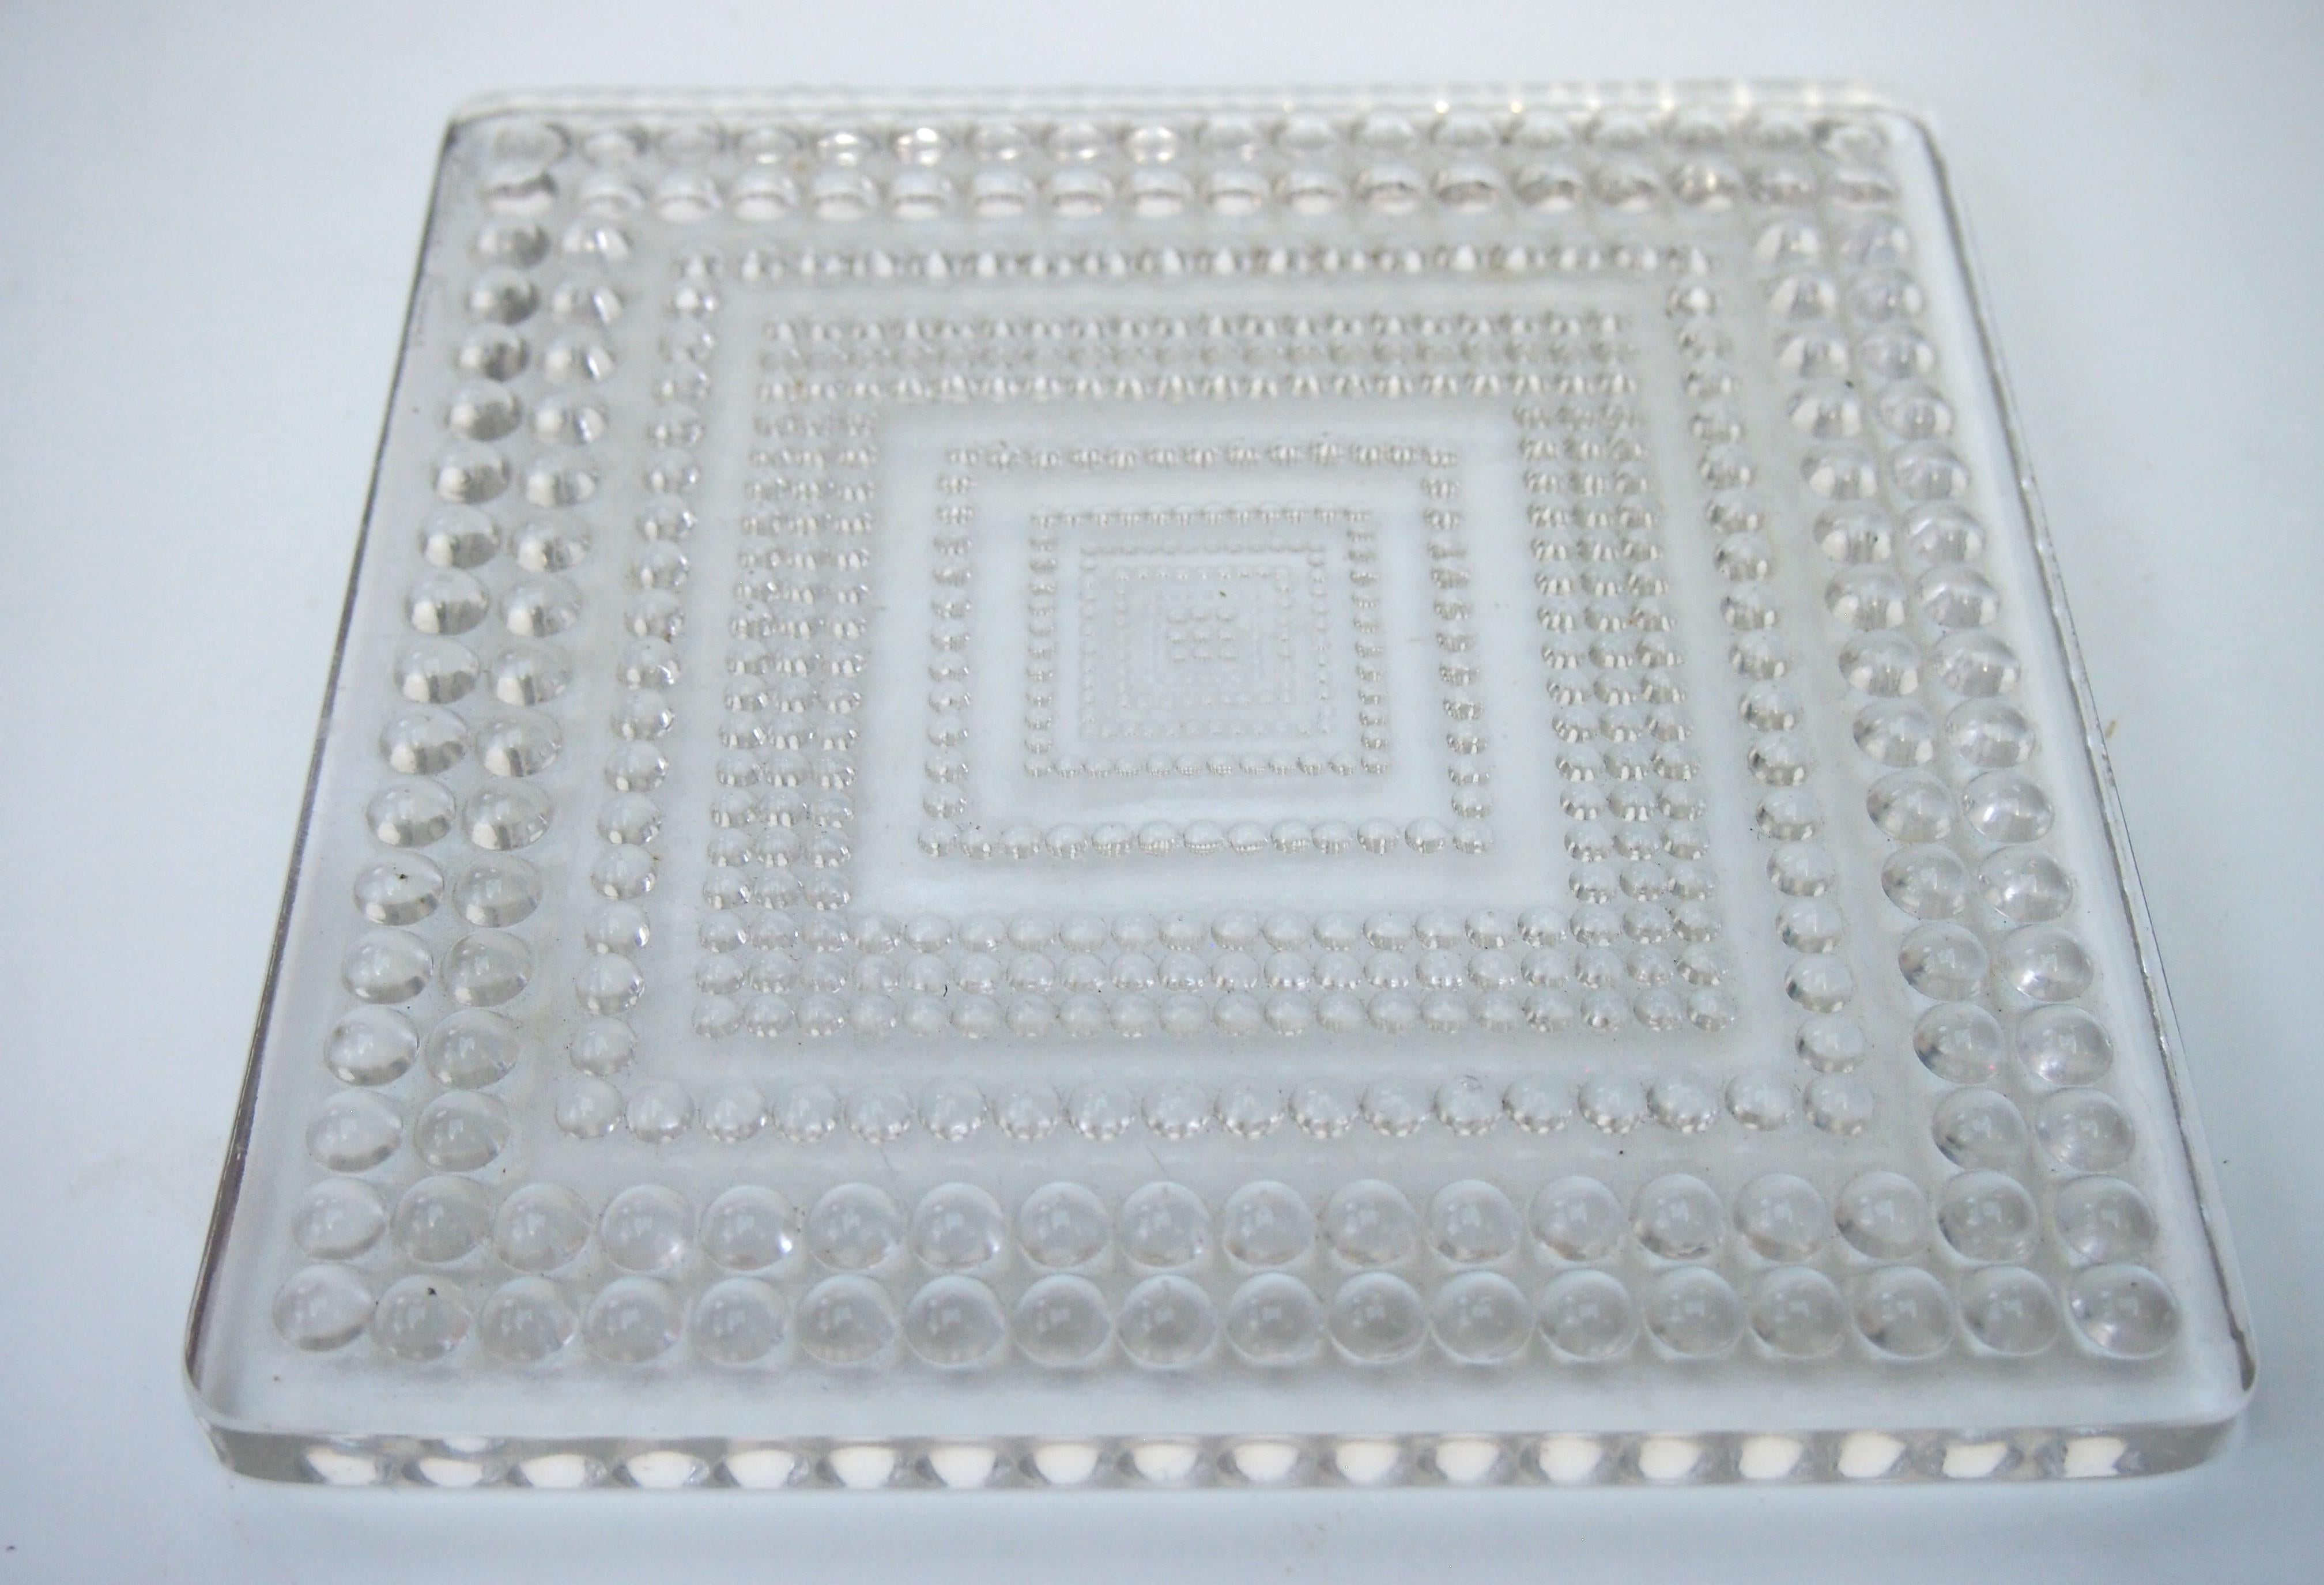 Rare Rene Lalique clear glass square Perles table panel 1934. As well as the usual Vases, Bowls, tableware, car mascots etc Rene Lalique made Architectural Installations -some of the more famous of these went into Churches, but he designed a wide